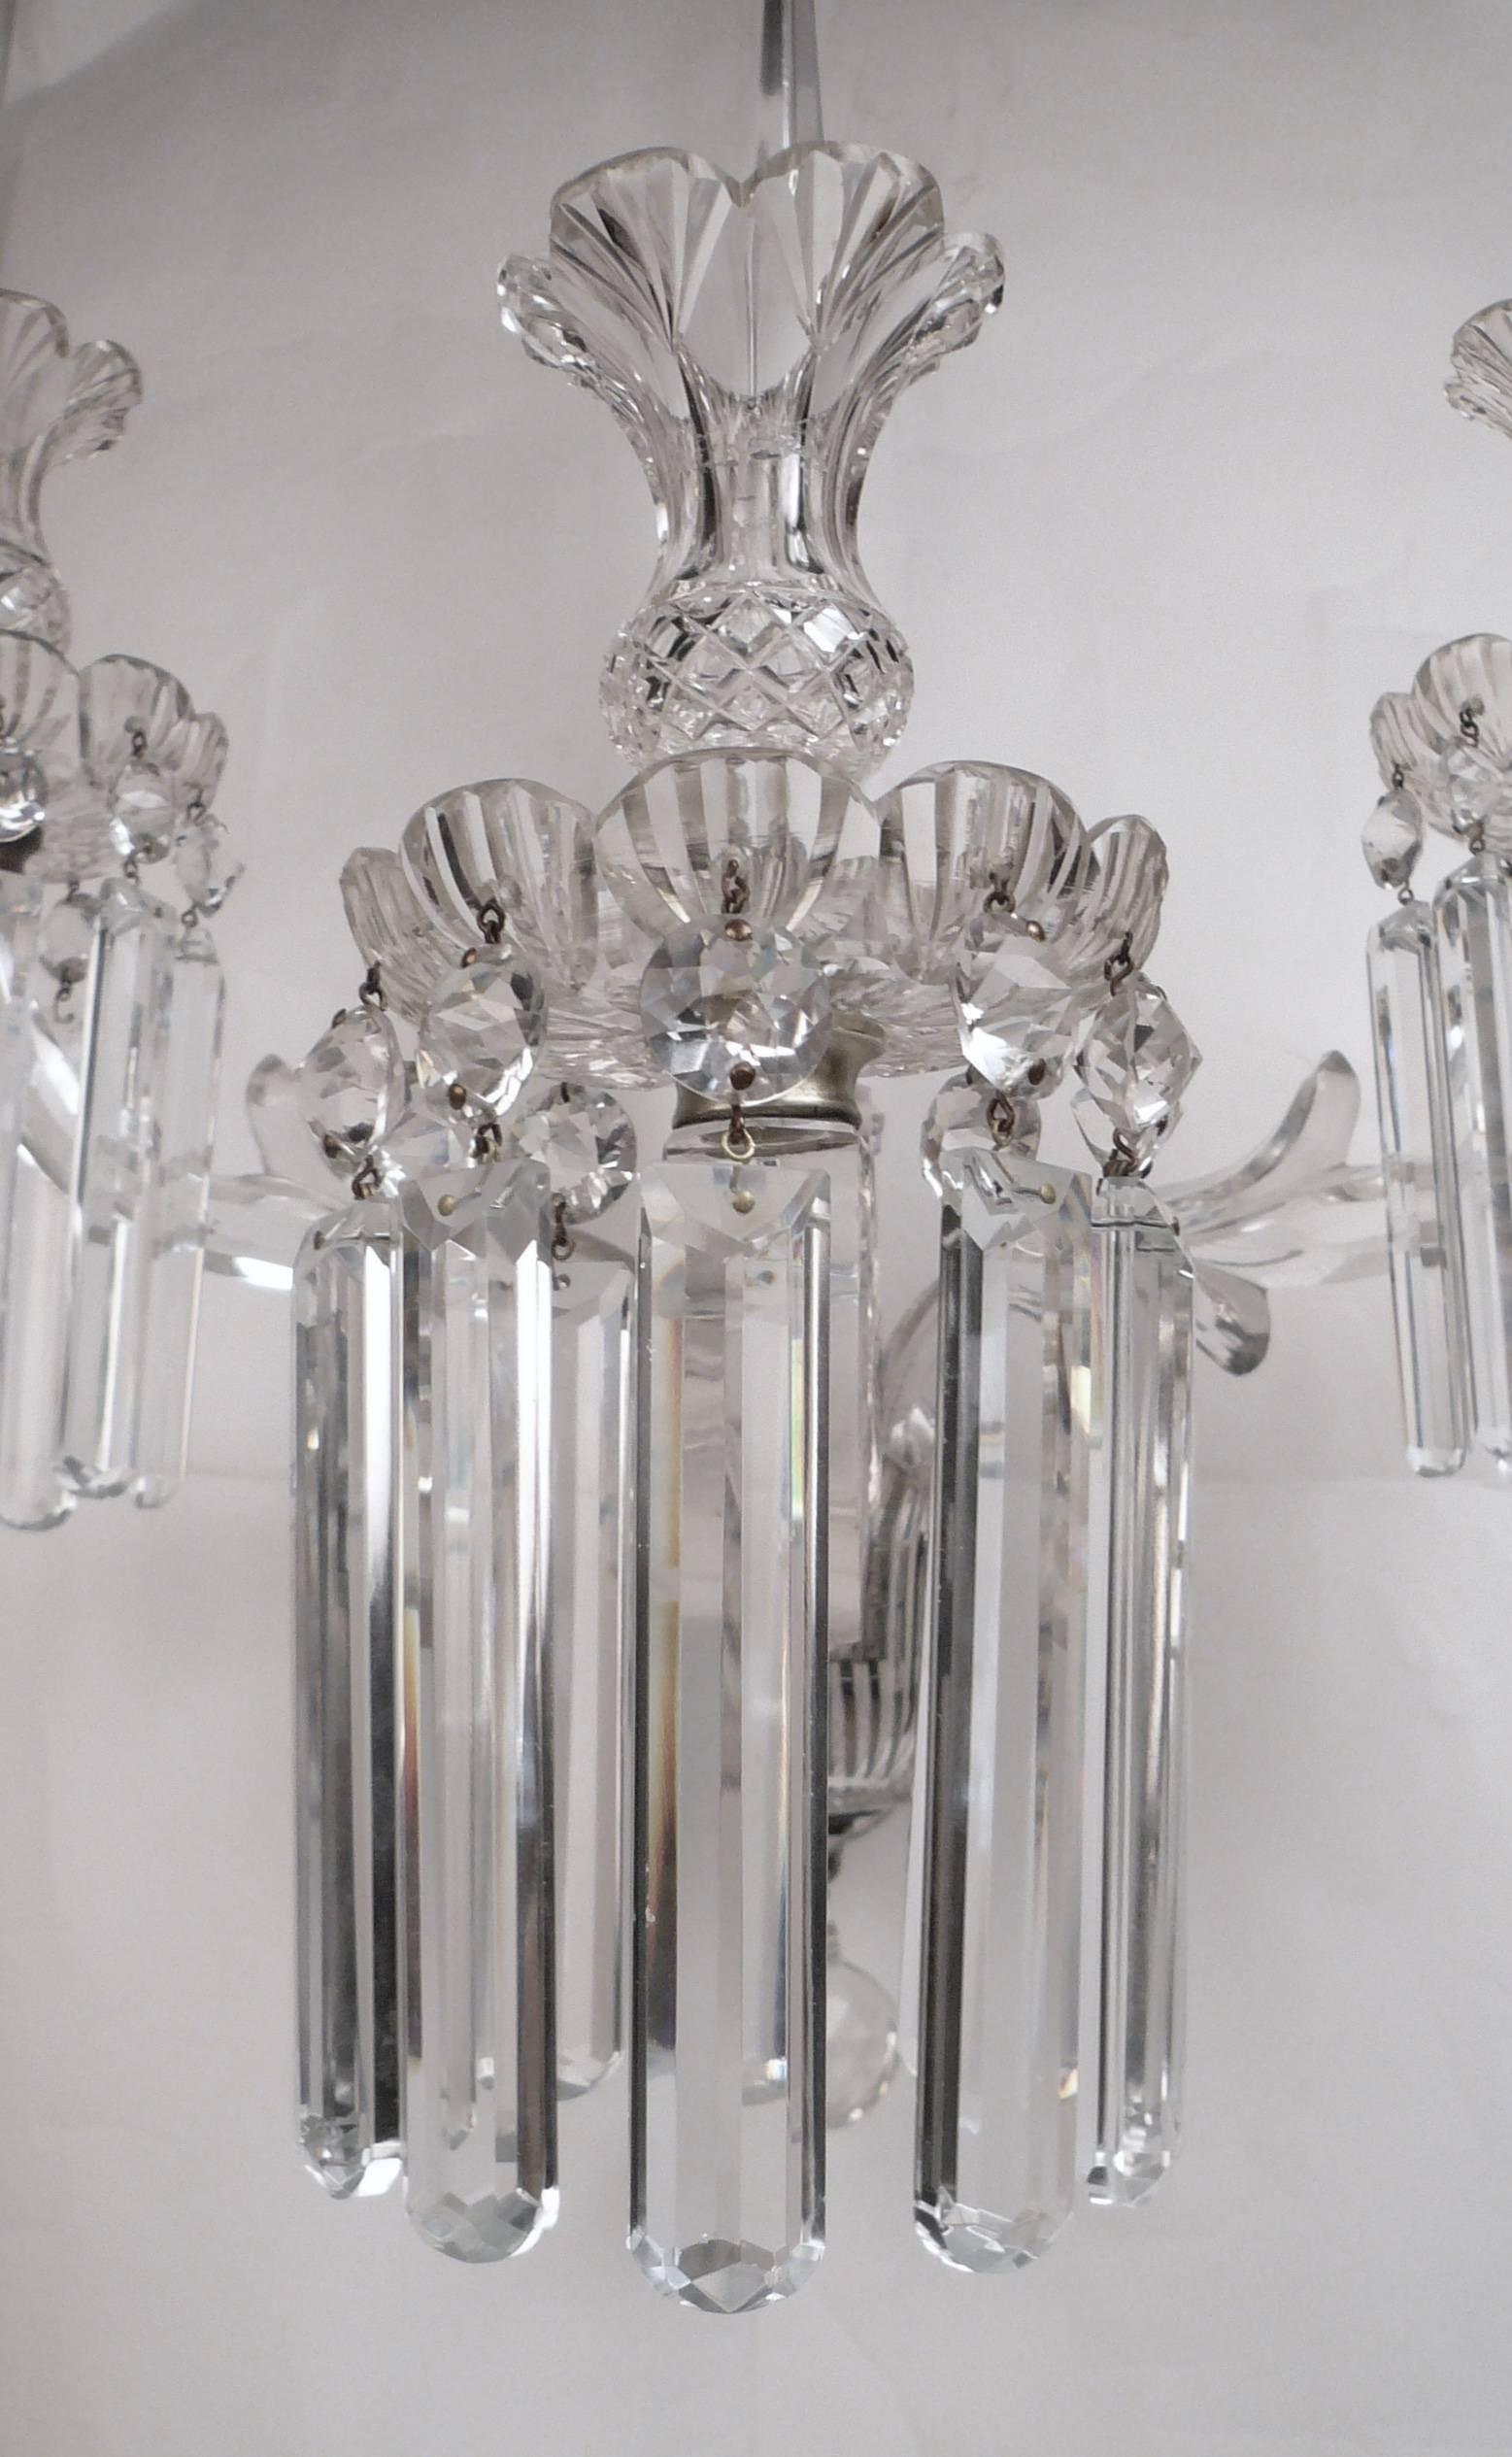 William IV Large Scale 19th Century English Cut Crystal Single Sconce